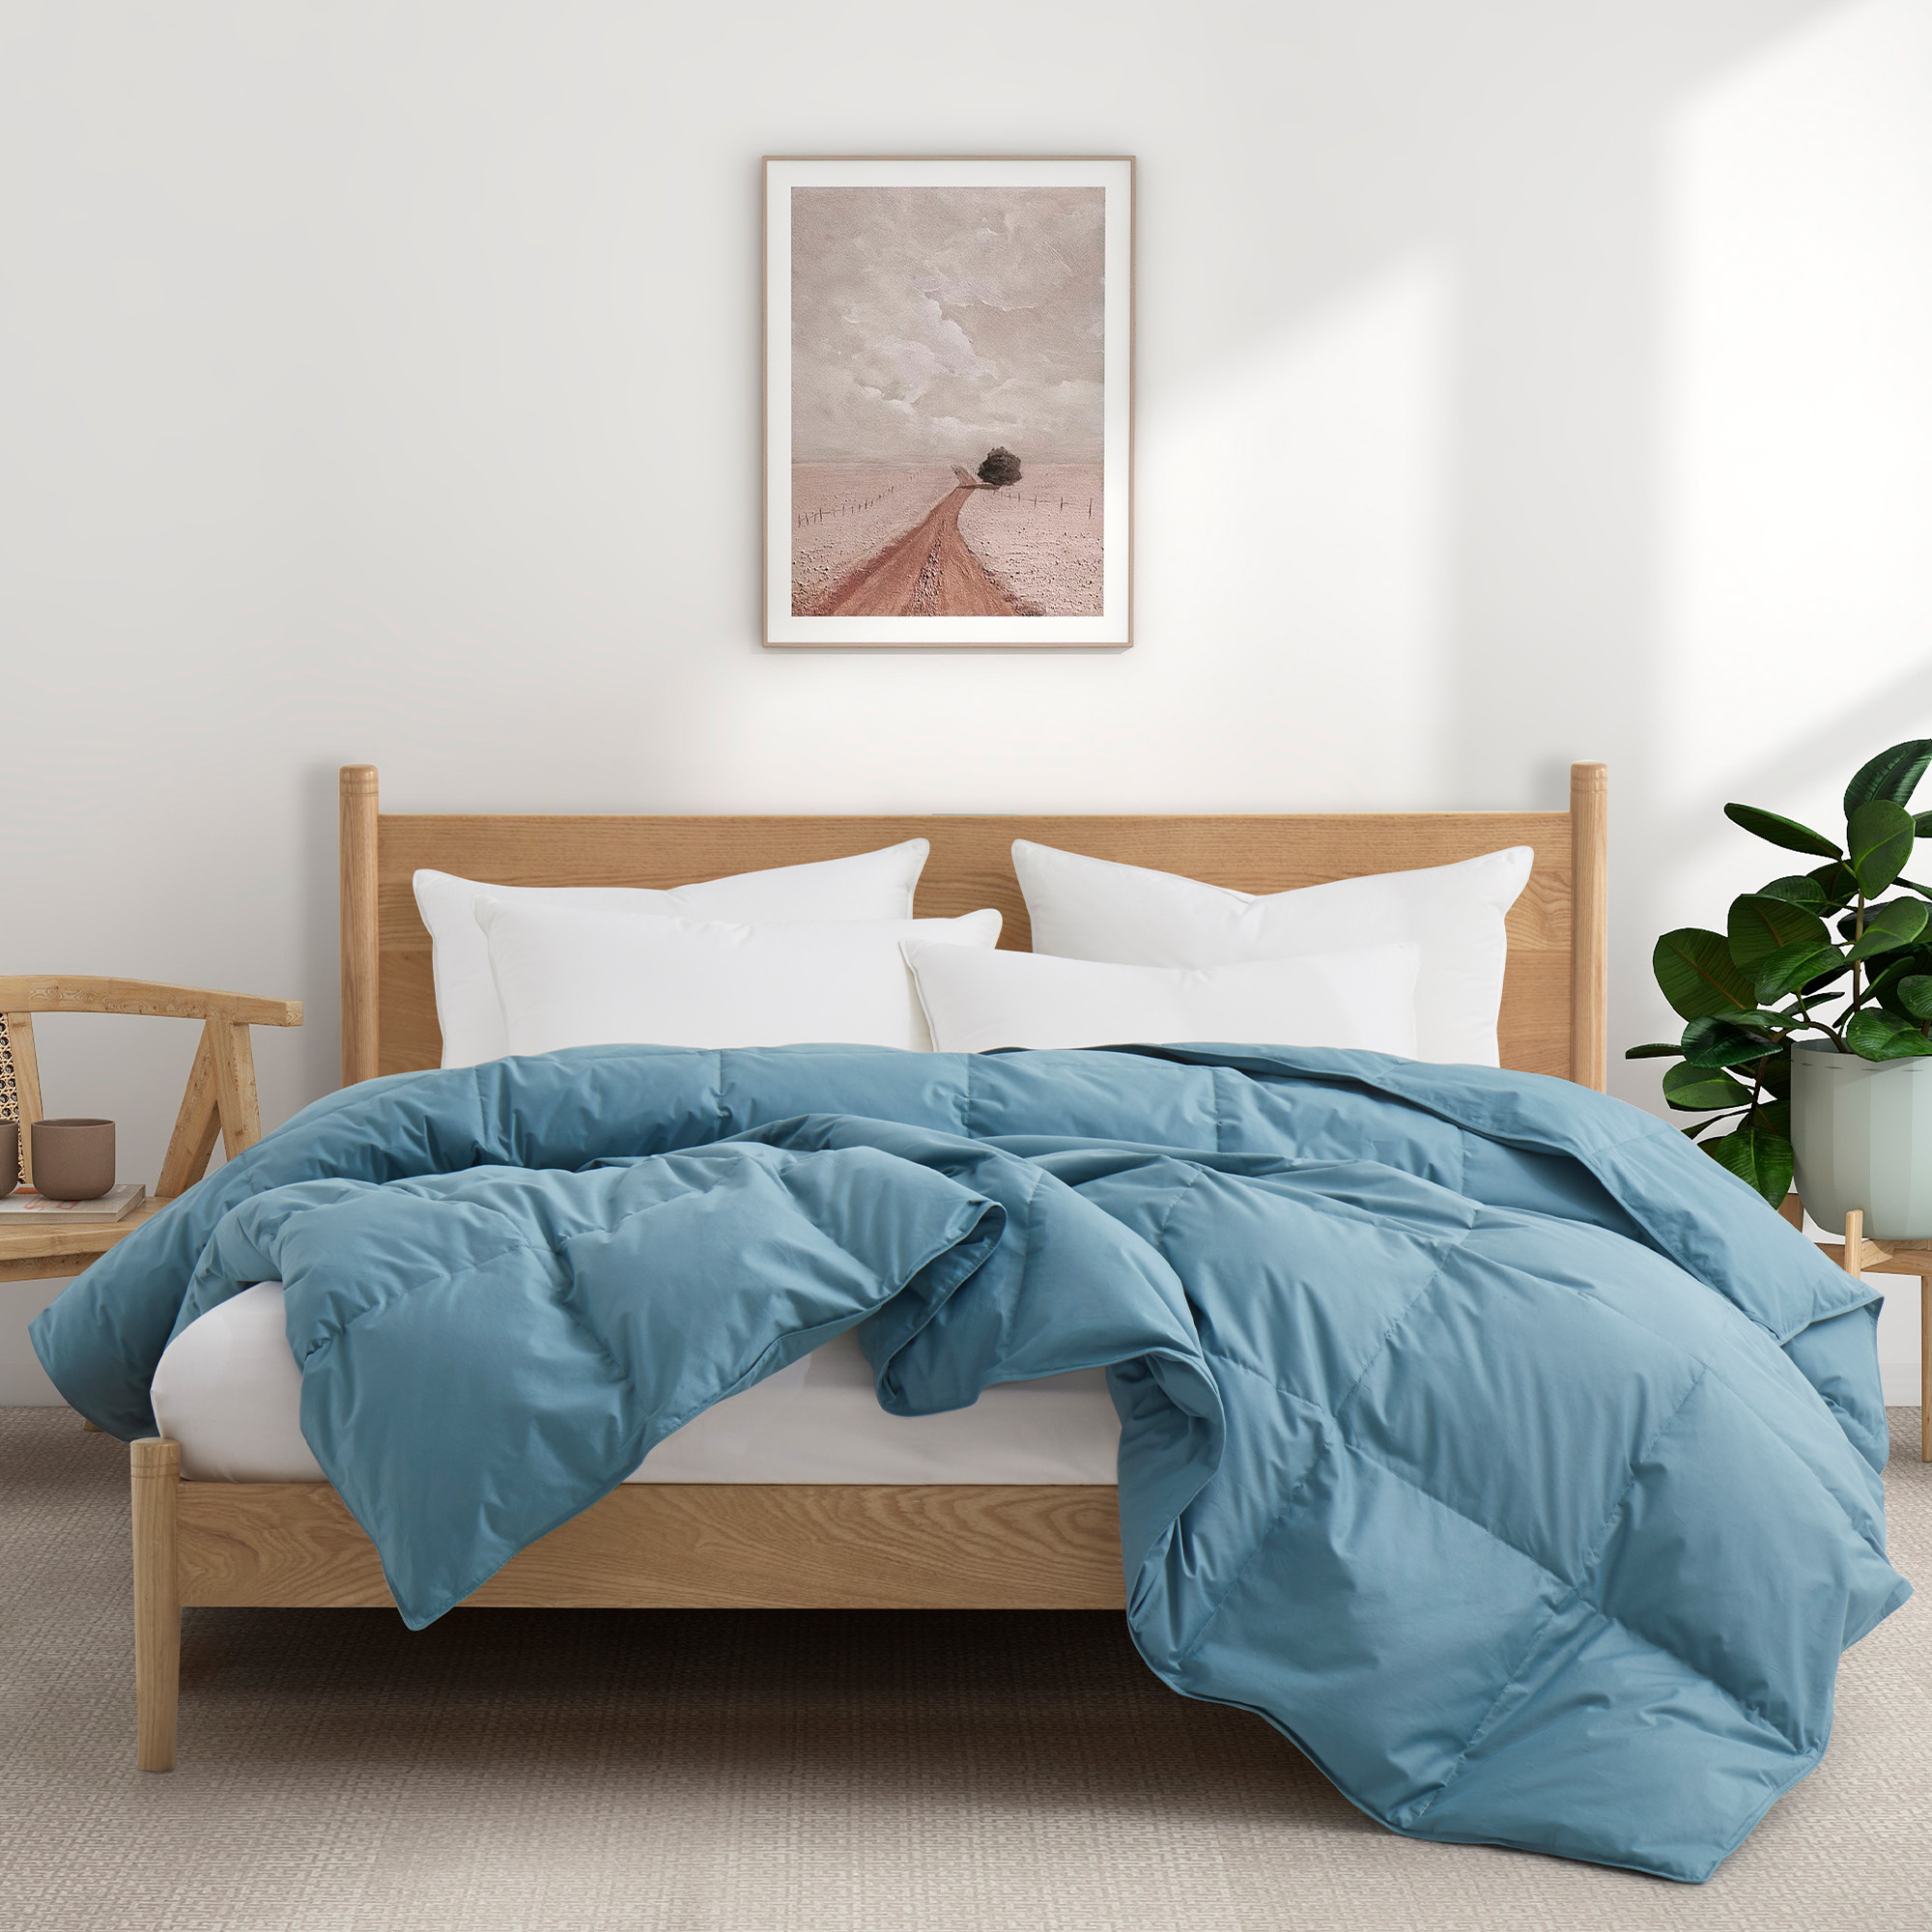 All Season Organic Cotton Comforter Filled With Down And Feather Fiber Twin Size - Steel Blue